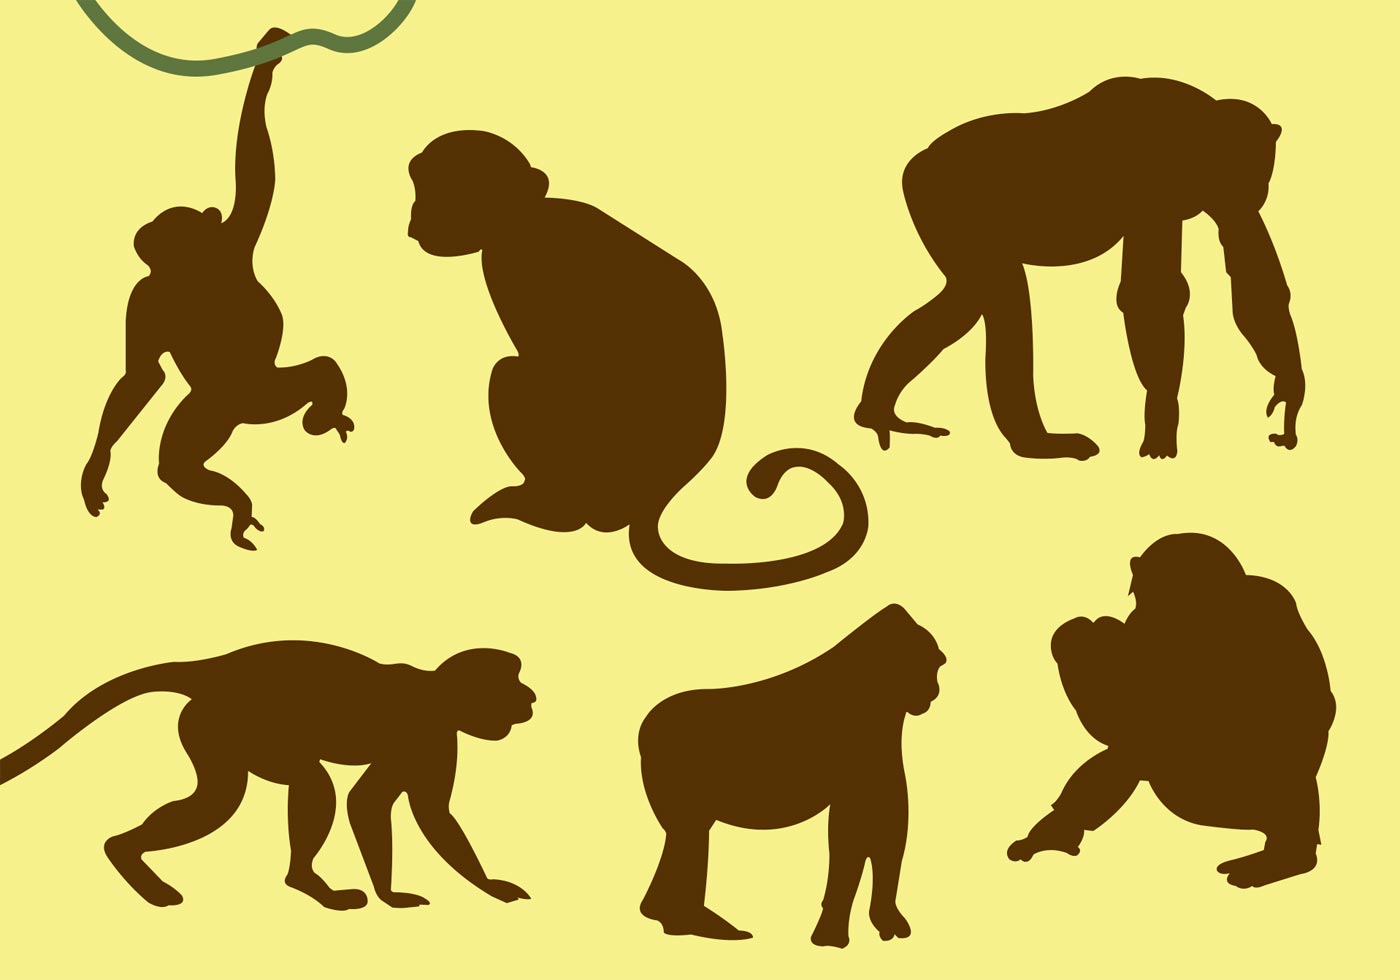 Download Vector Collection of Monkey Silhouettes 92914 - Download Free Vectors, Clipart Graphics & Vector Art